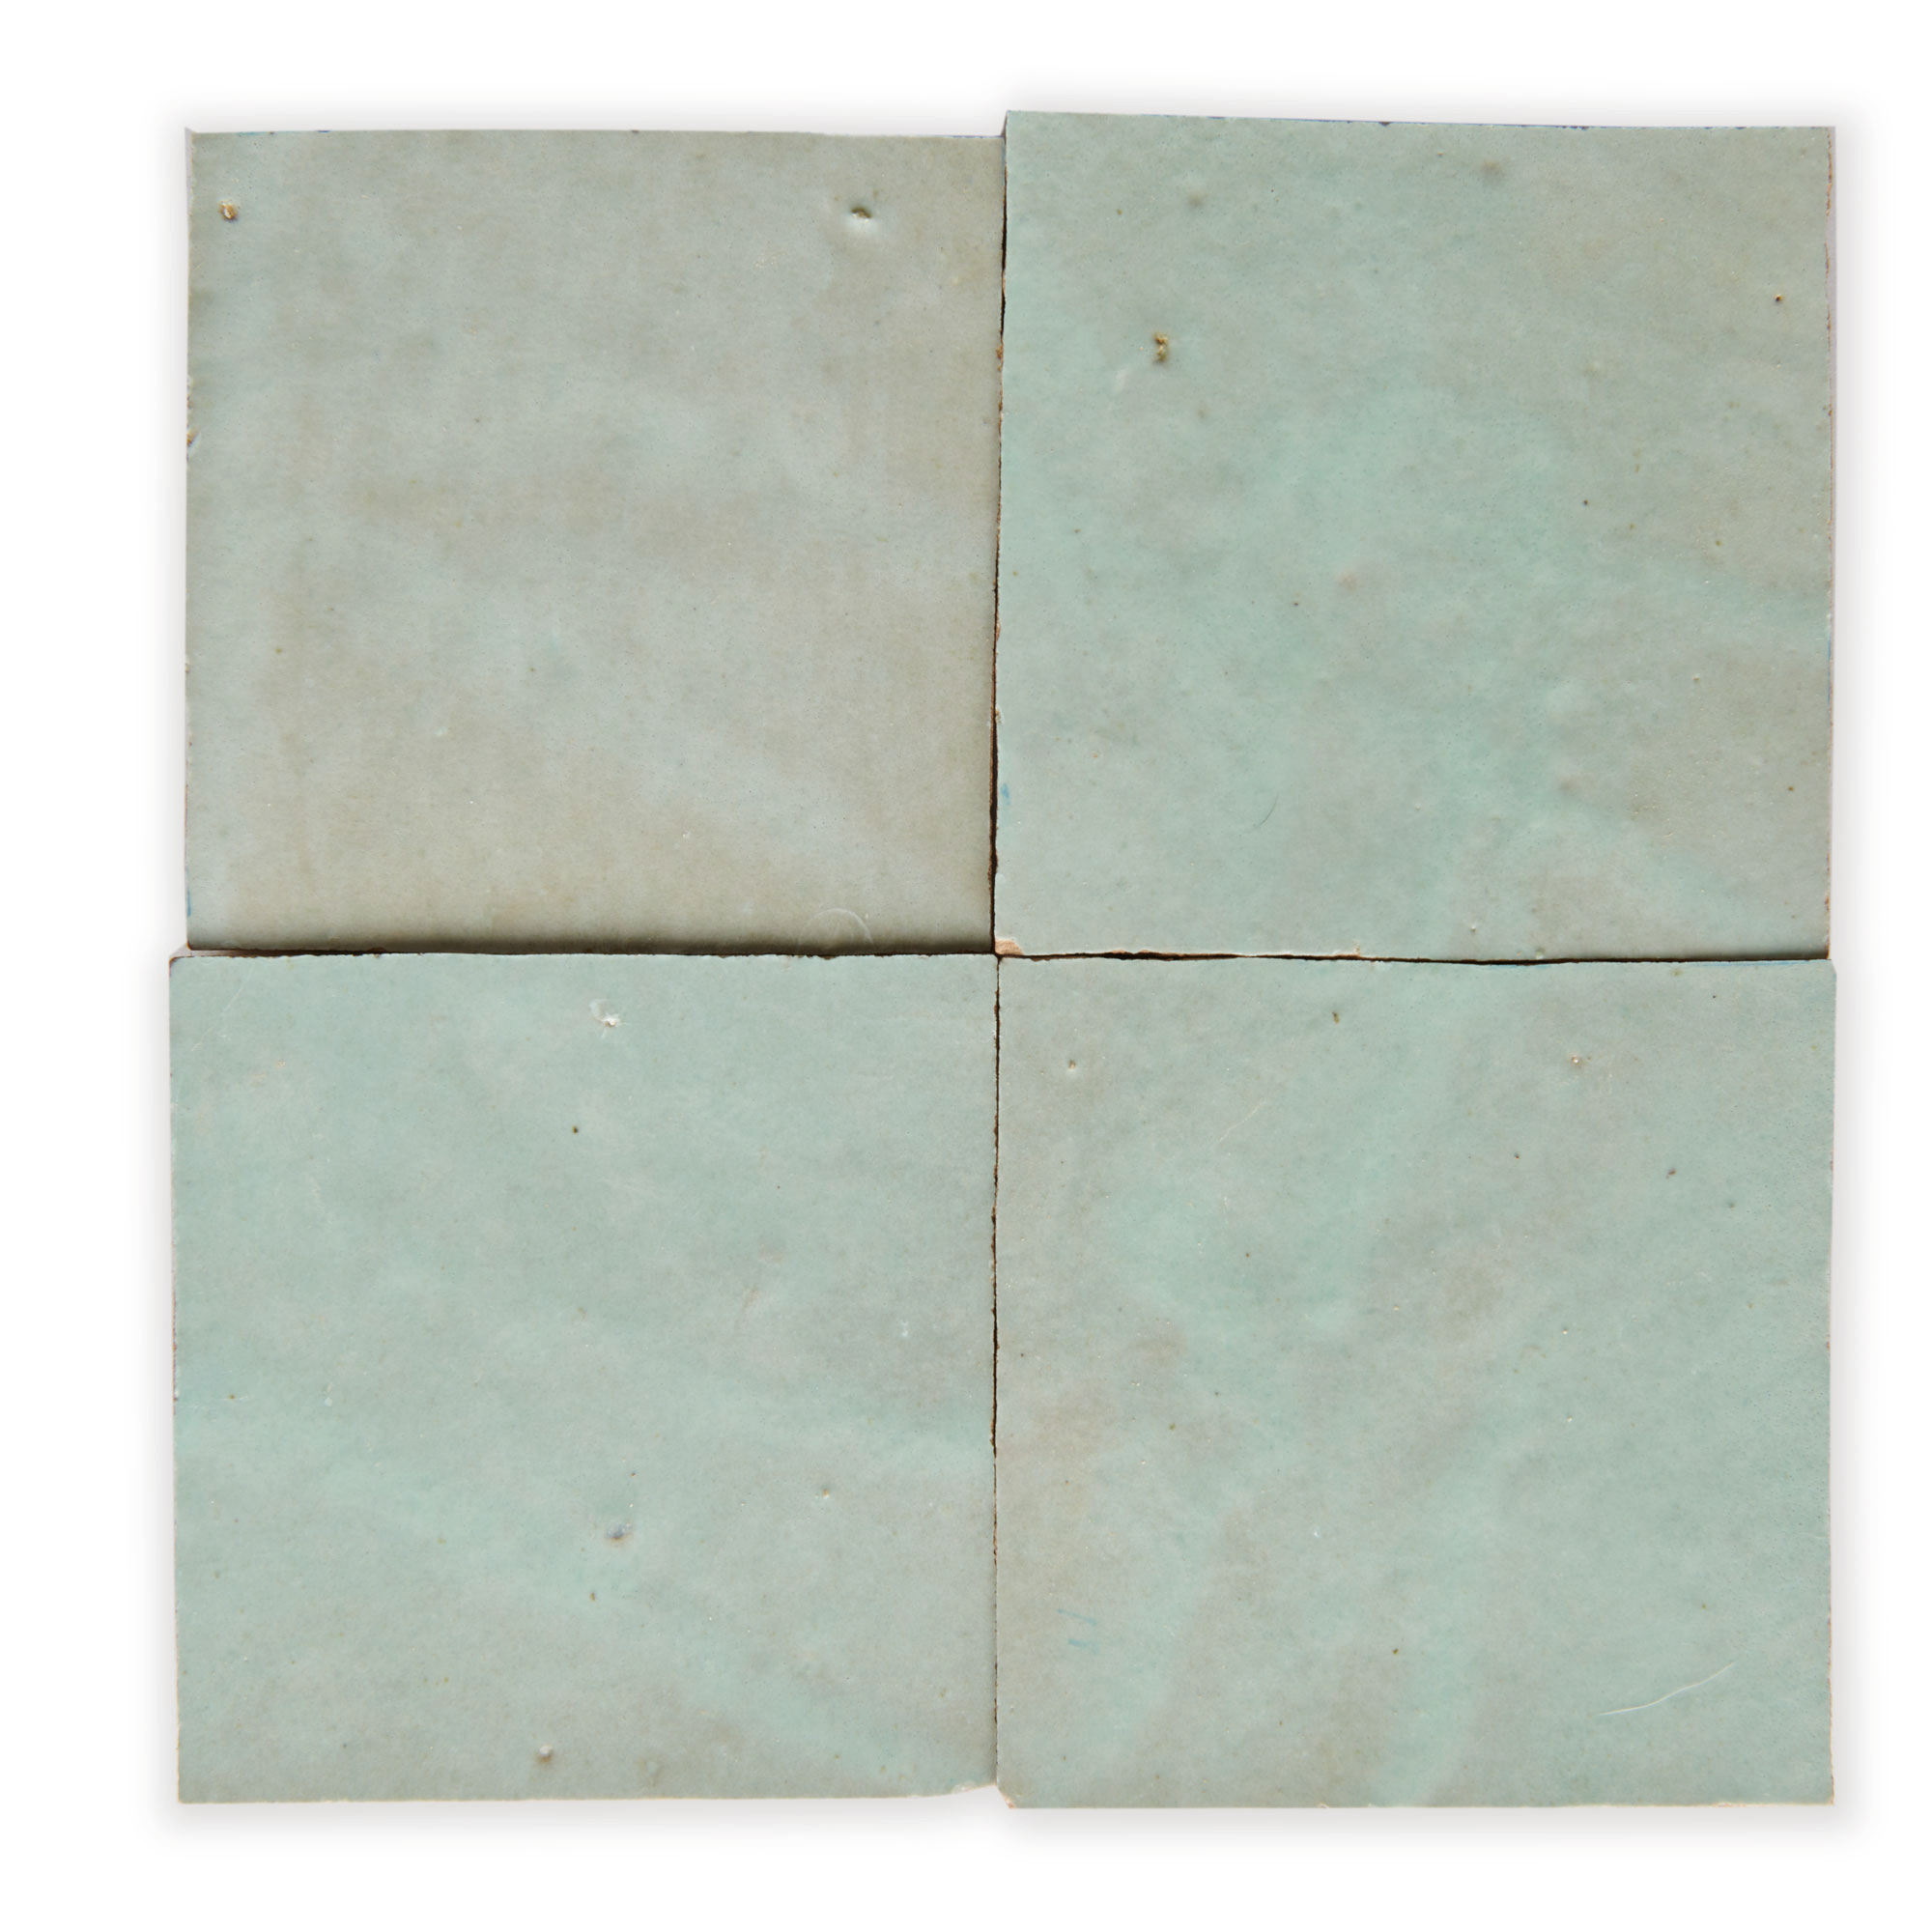 Riad White Ceramic Wall Tile - 4 x 4 in. - The Tile Shop